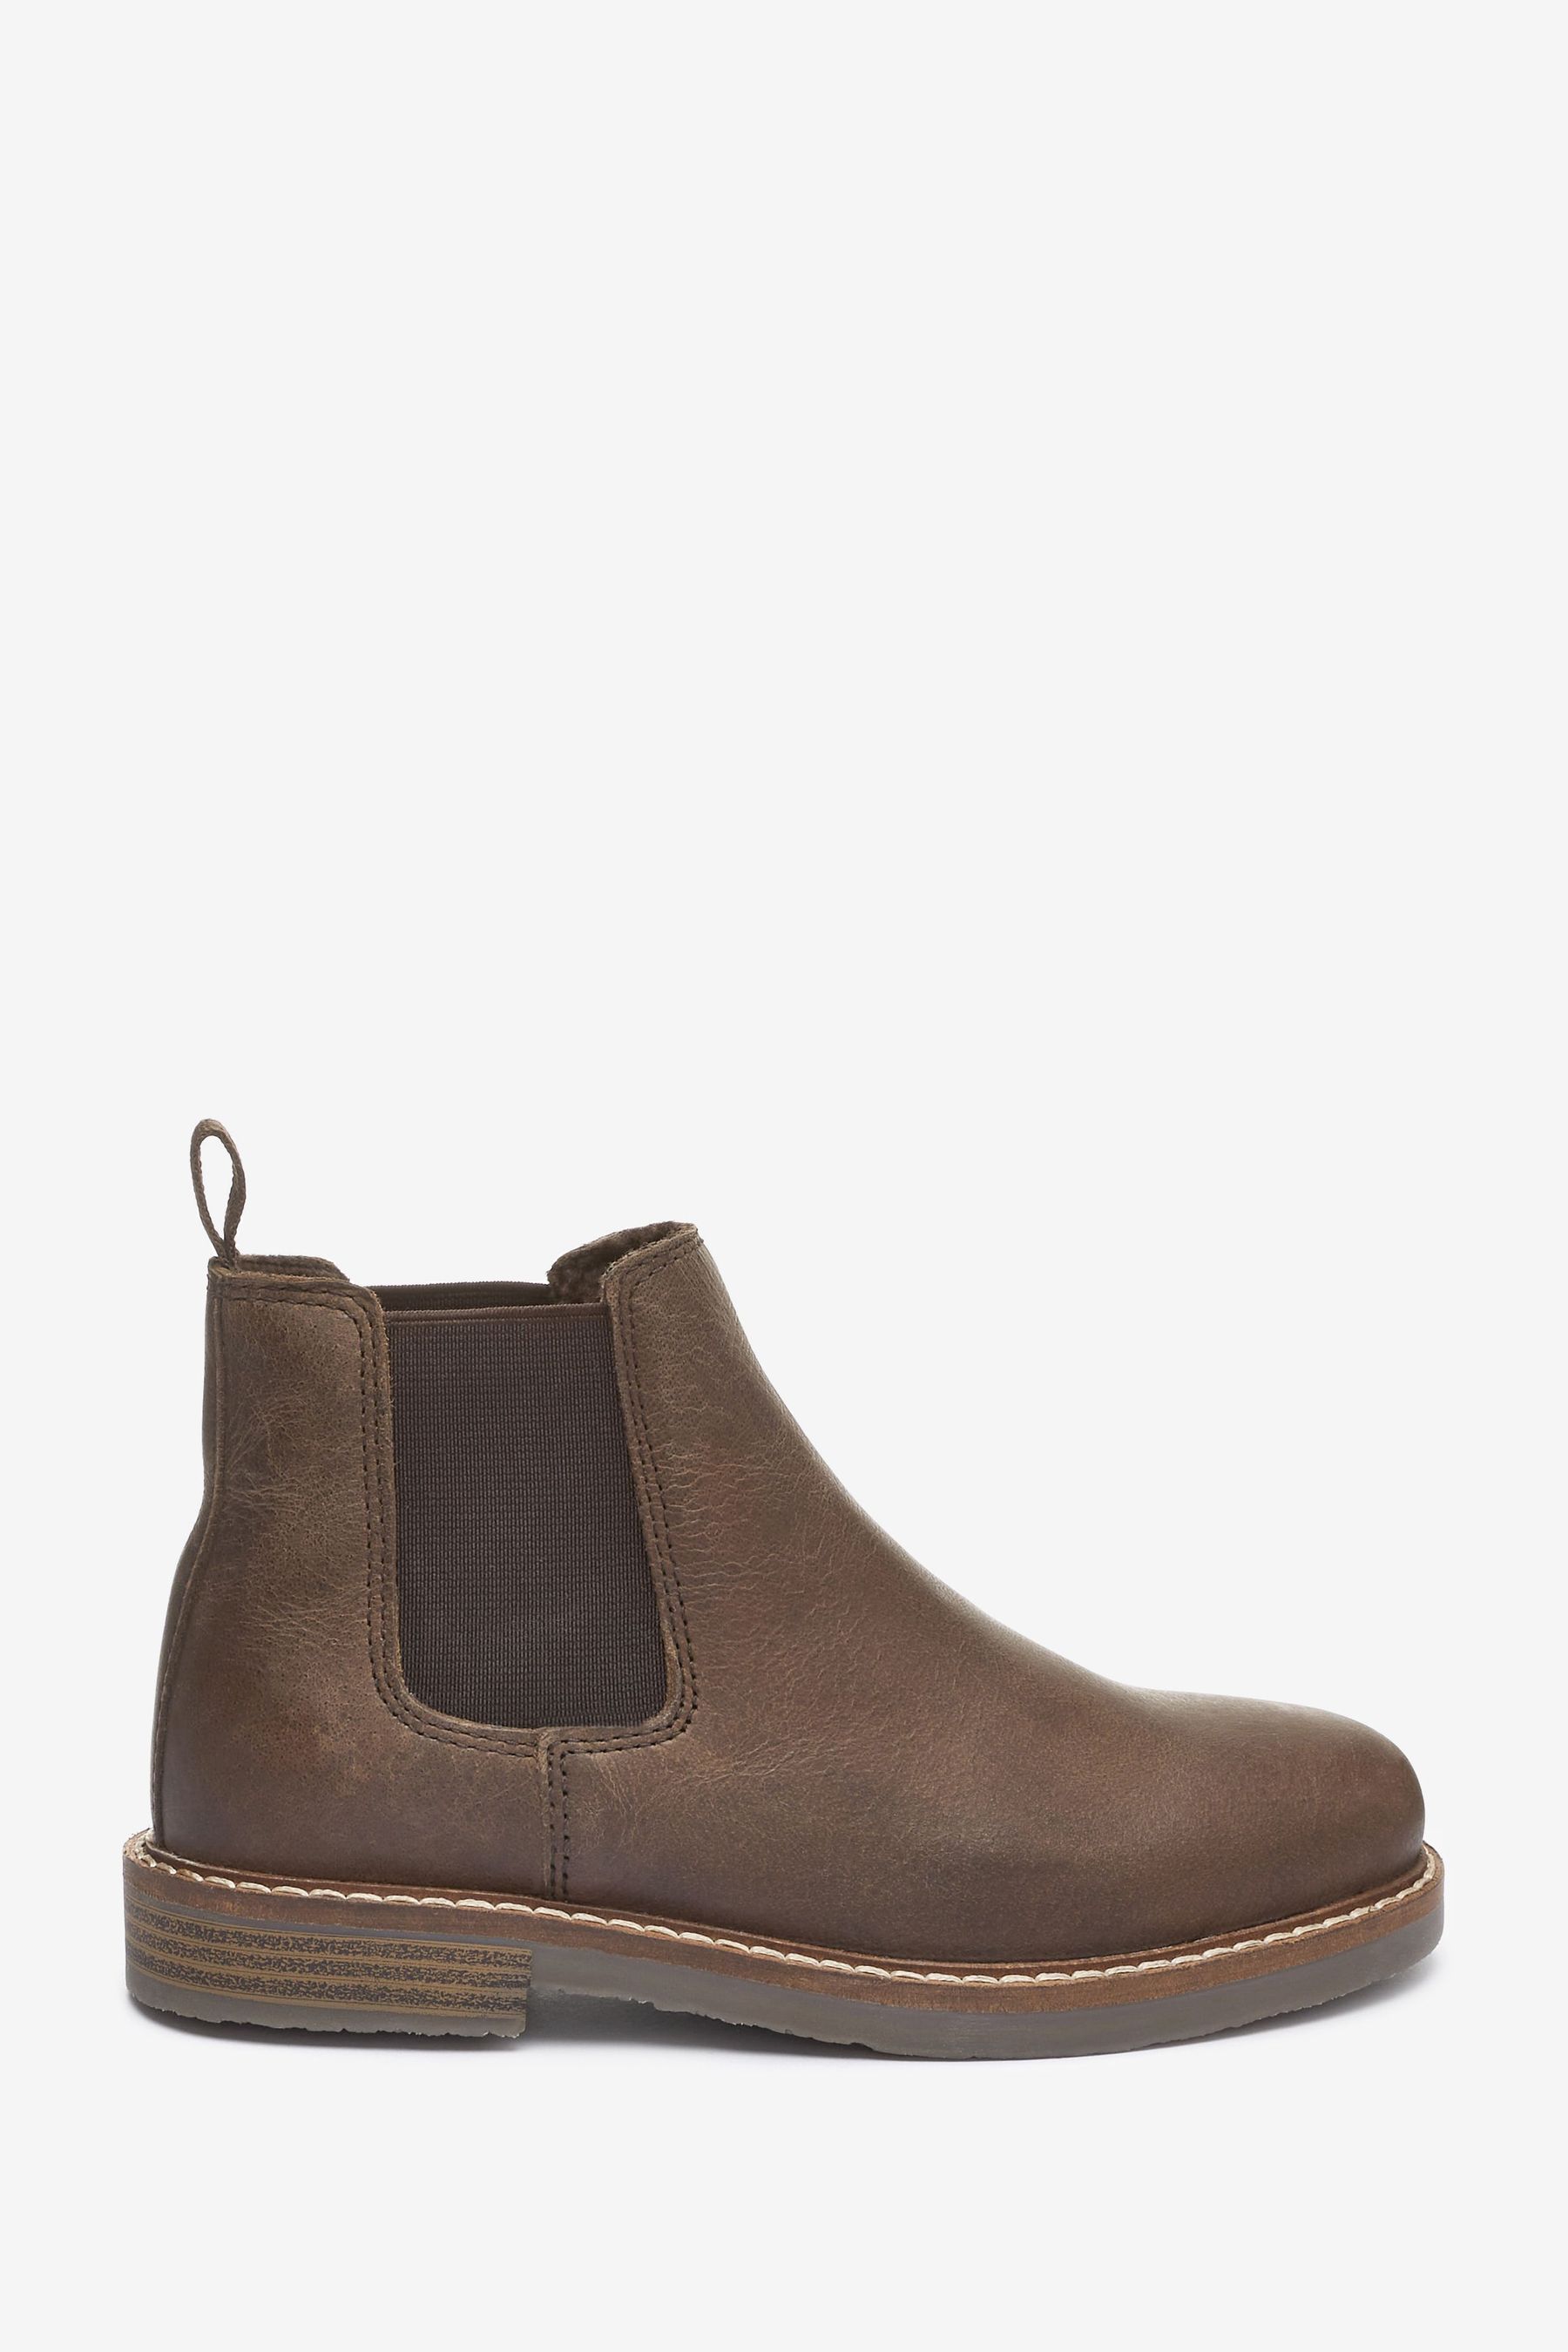 Buy Brown Standard Fit (F) Warm Lined Leather Chelsea Boots from the ...